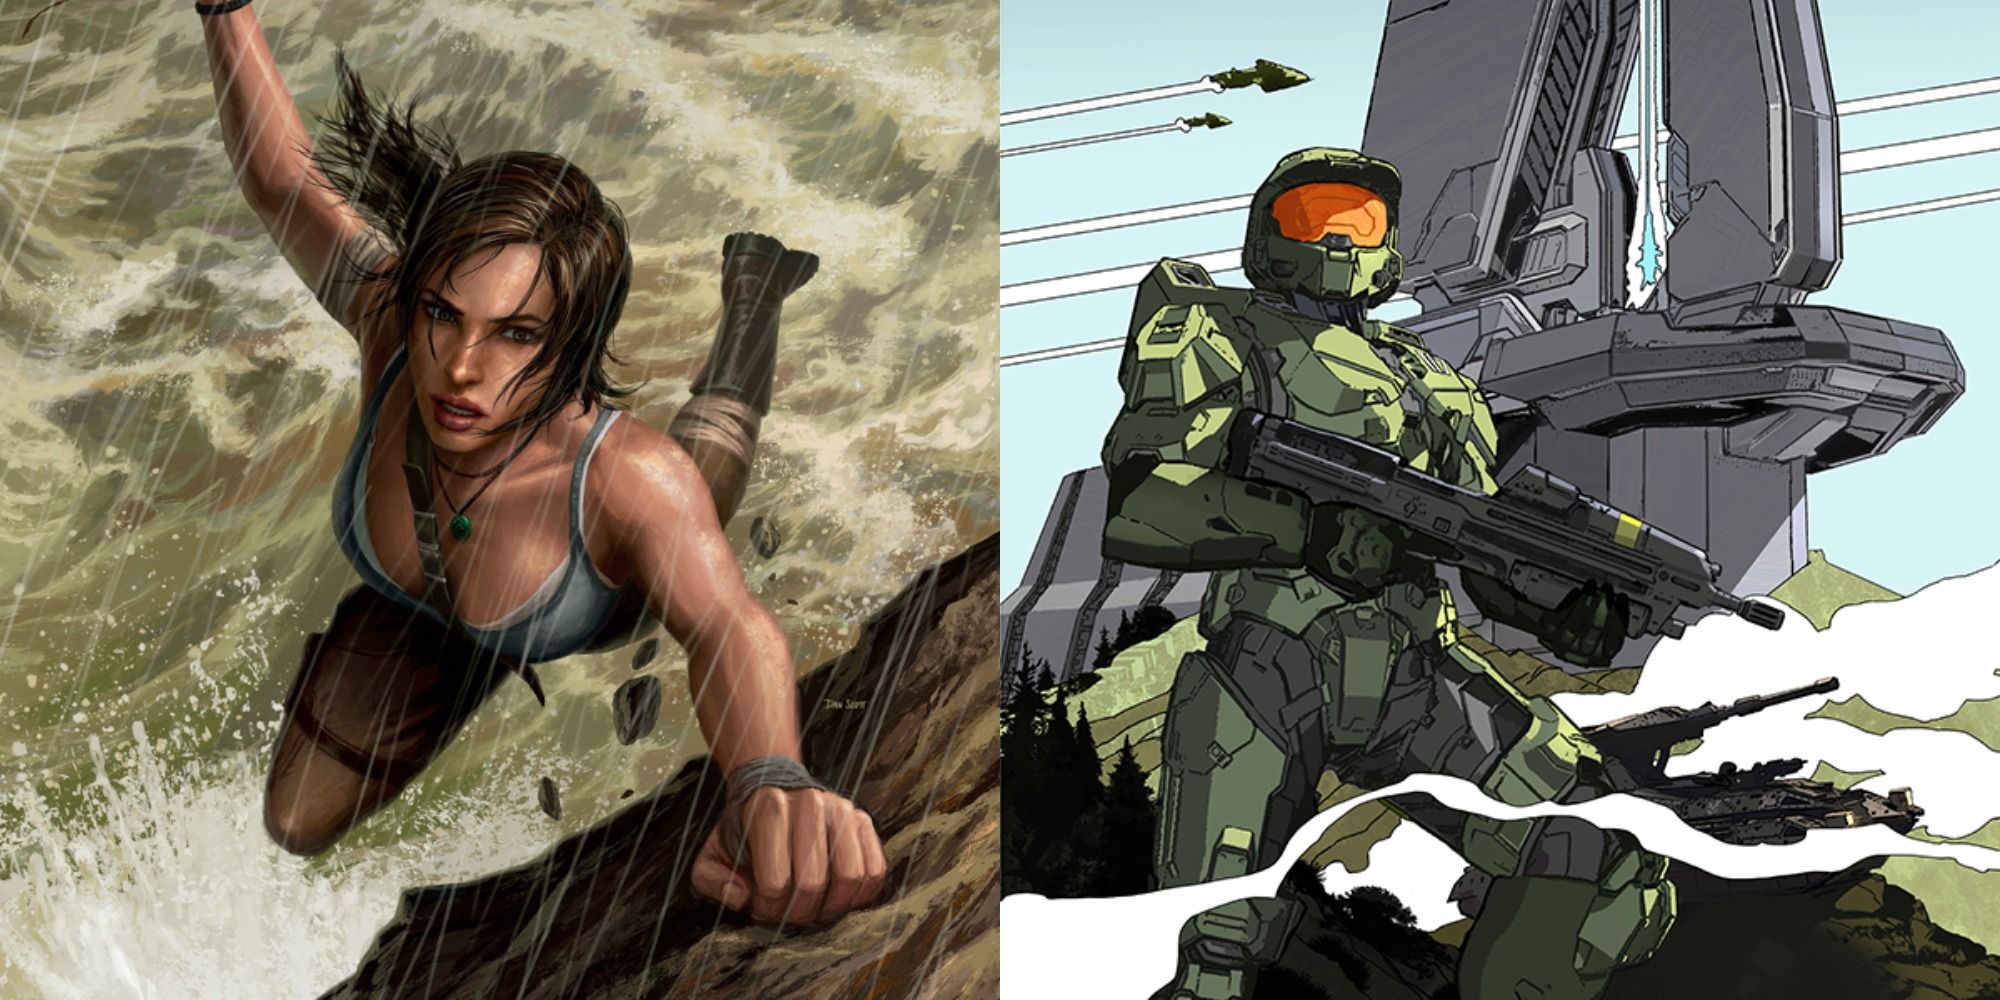 Split image showing covers for Tomb Raider and Halo comics